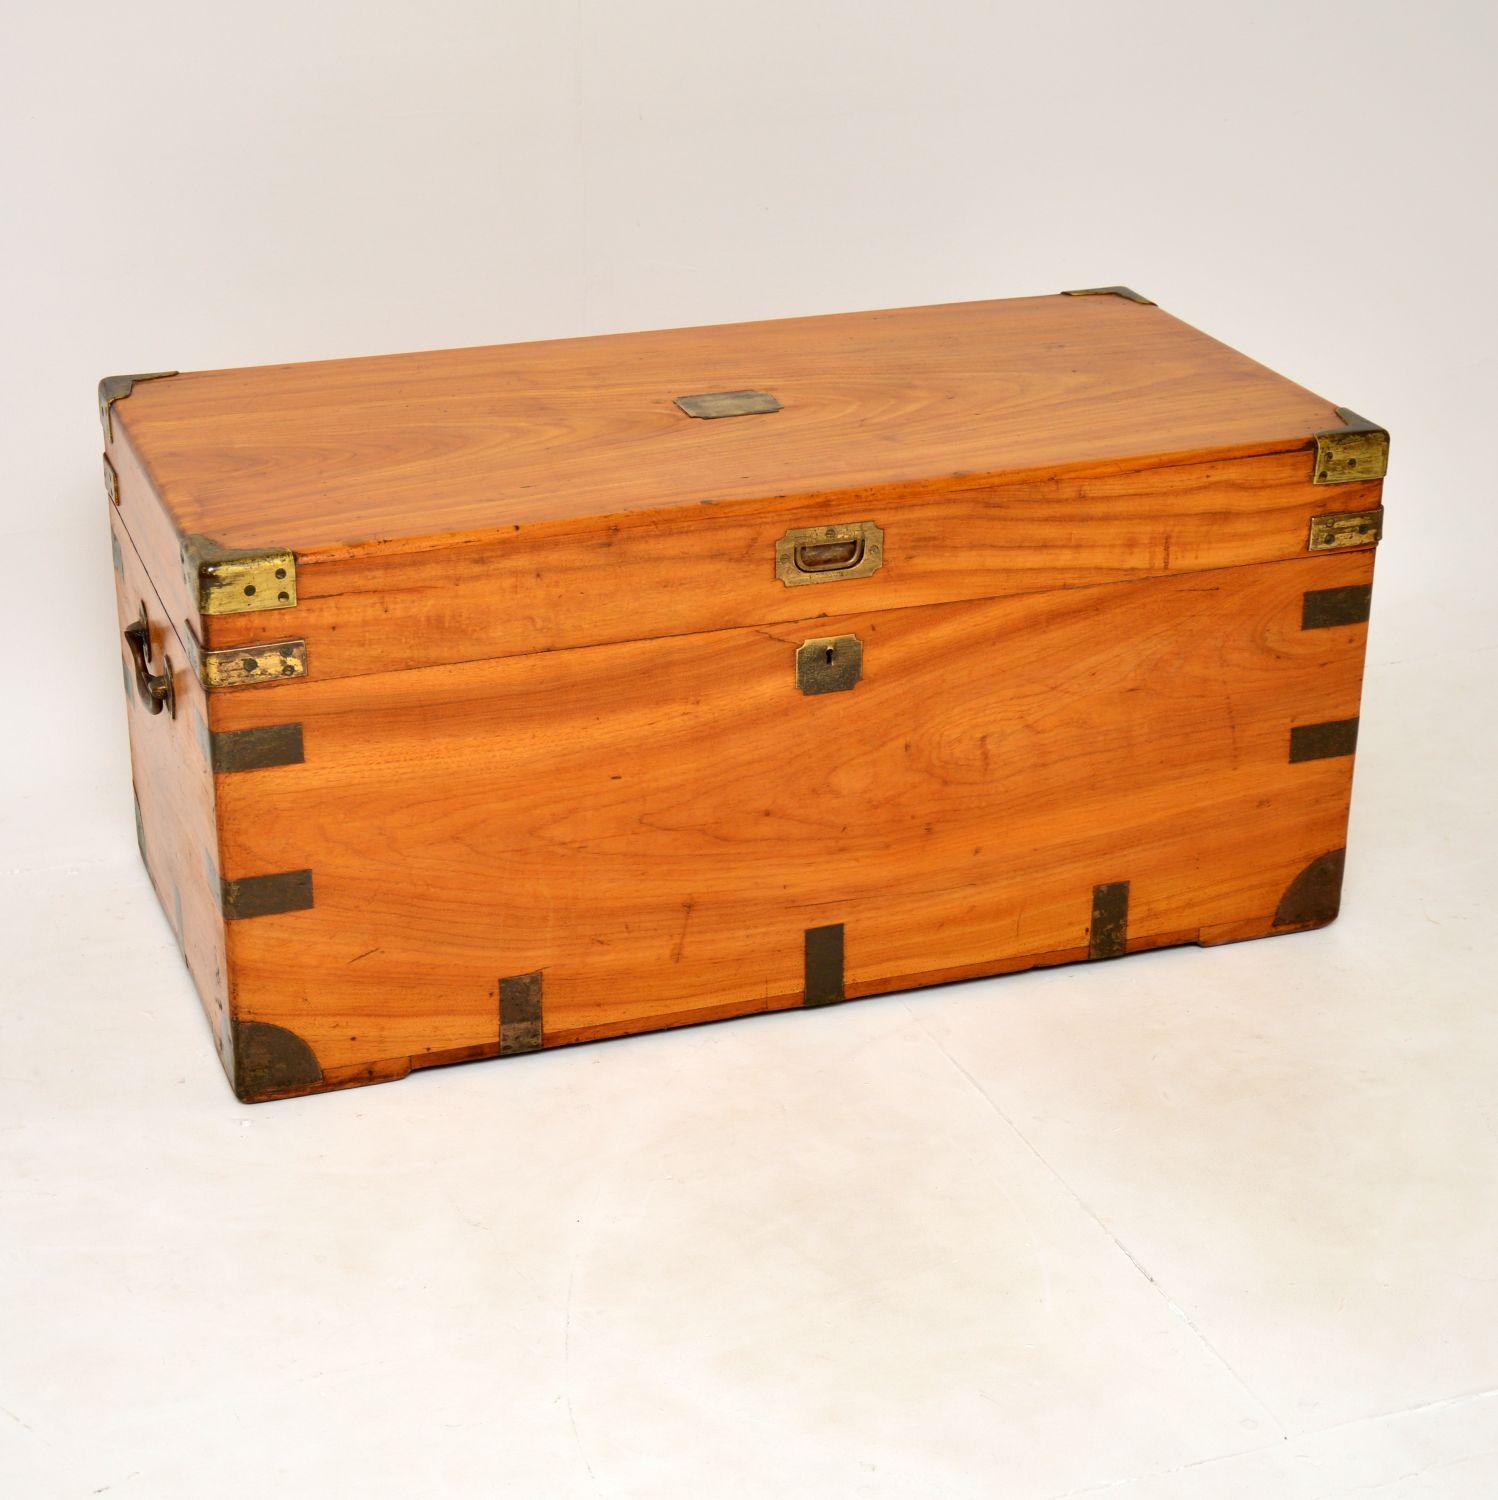 An excellent antique military campaign chest in camphor wood and brass. This was made in England, it dates from around the 1860-1880 period.

It is very well made, and is as good an example as you are likely to see. The brass mounts are of